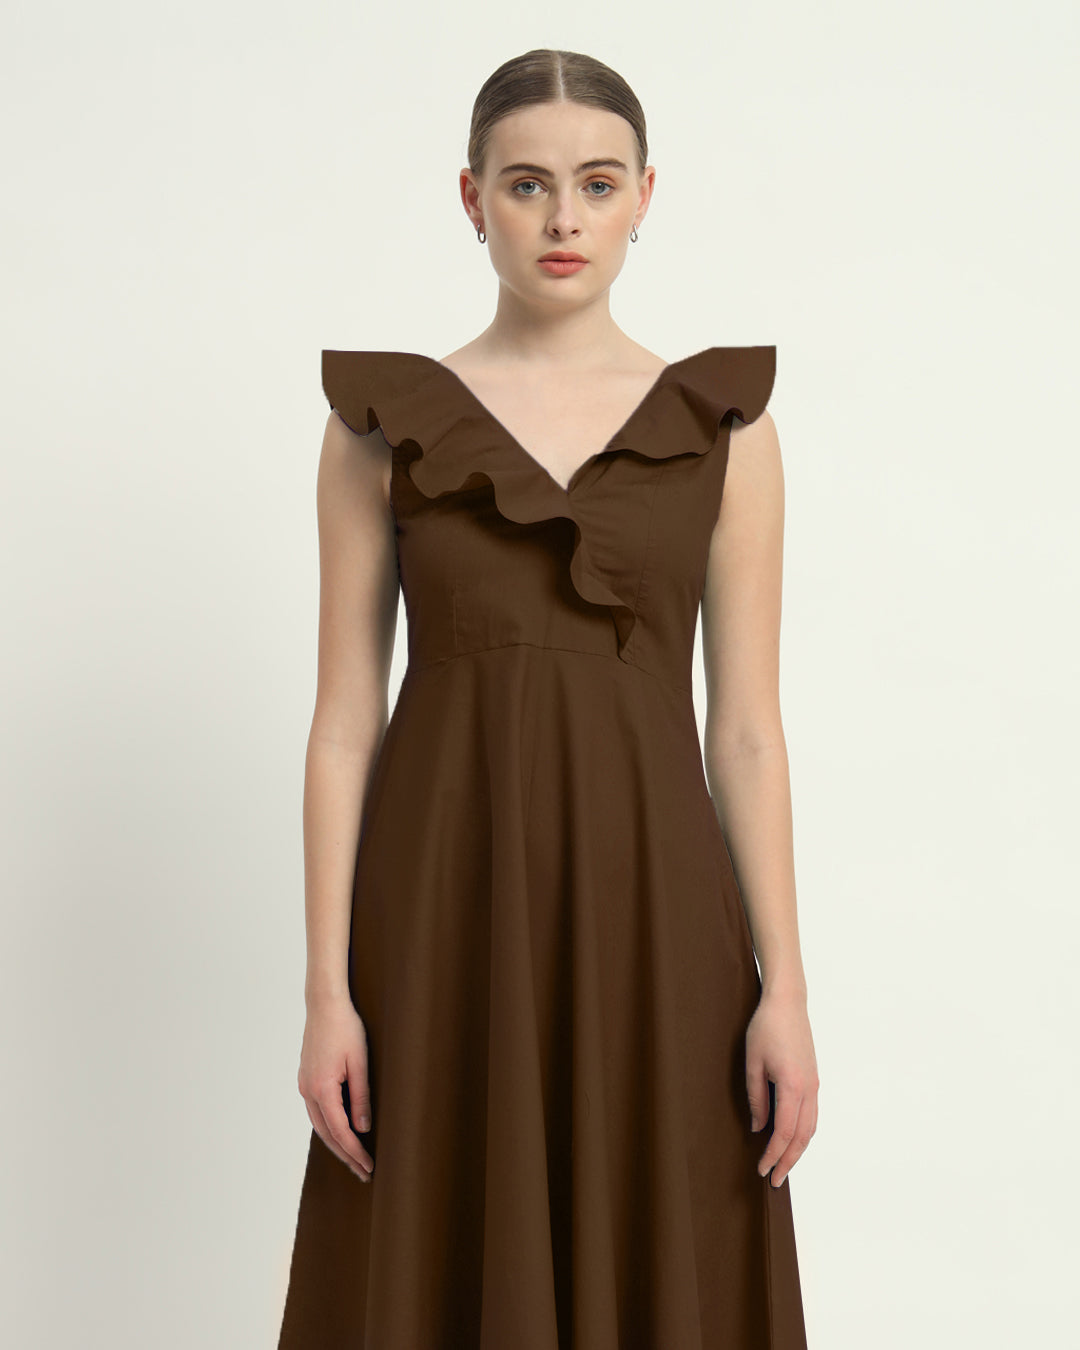 The Nutshell Albany Cotton Dress